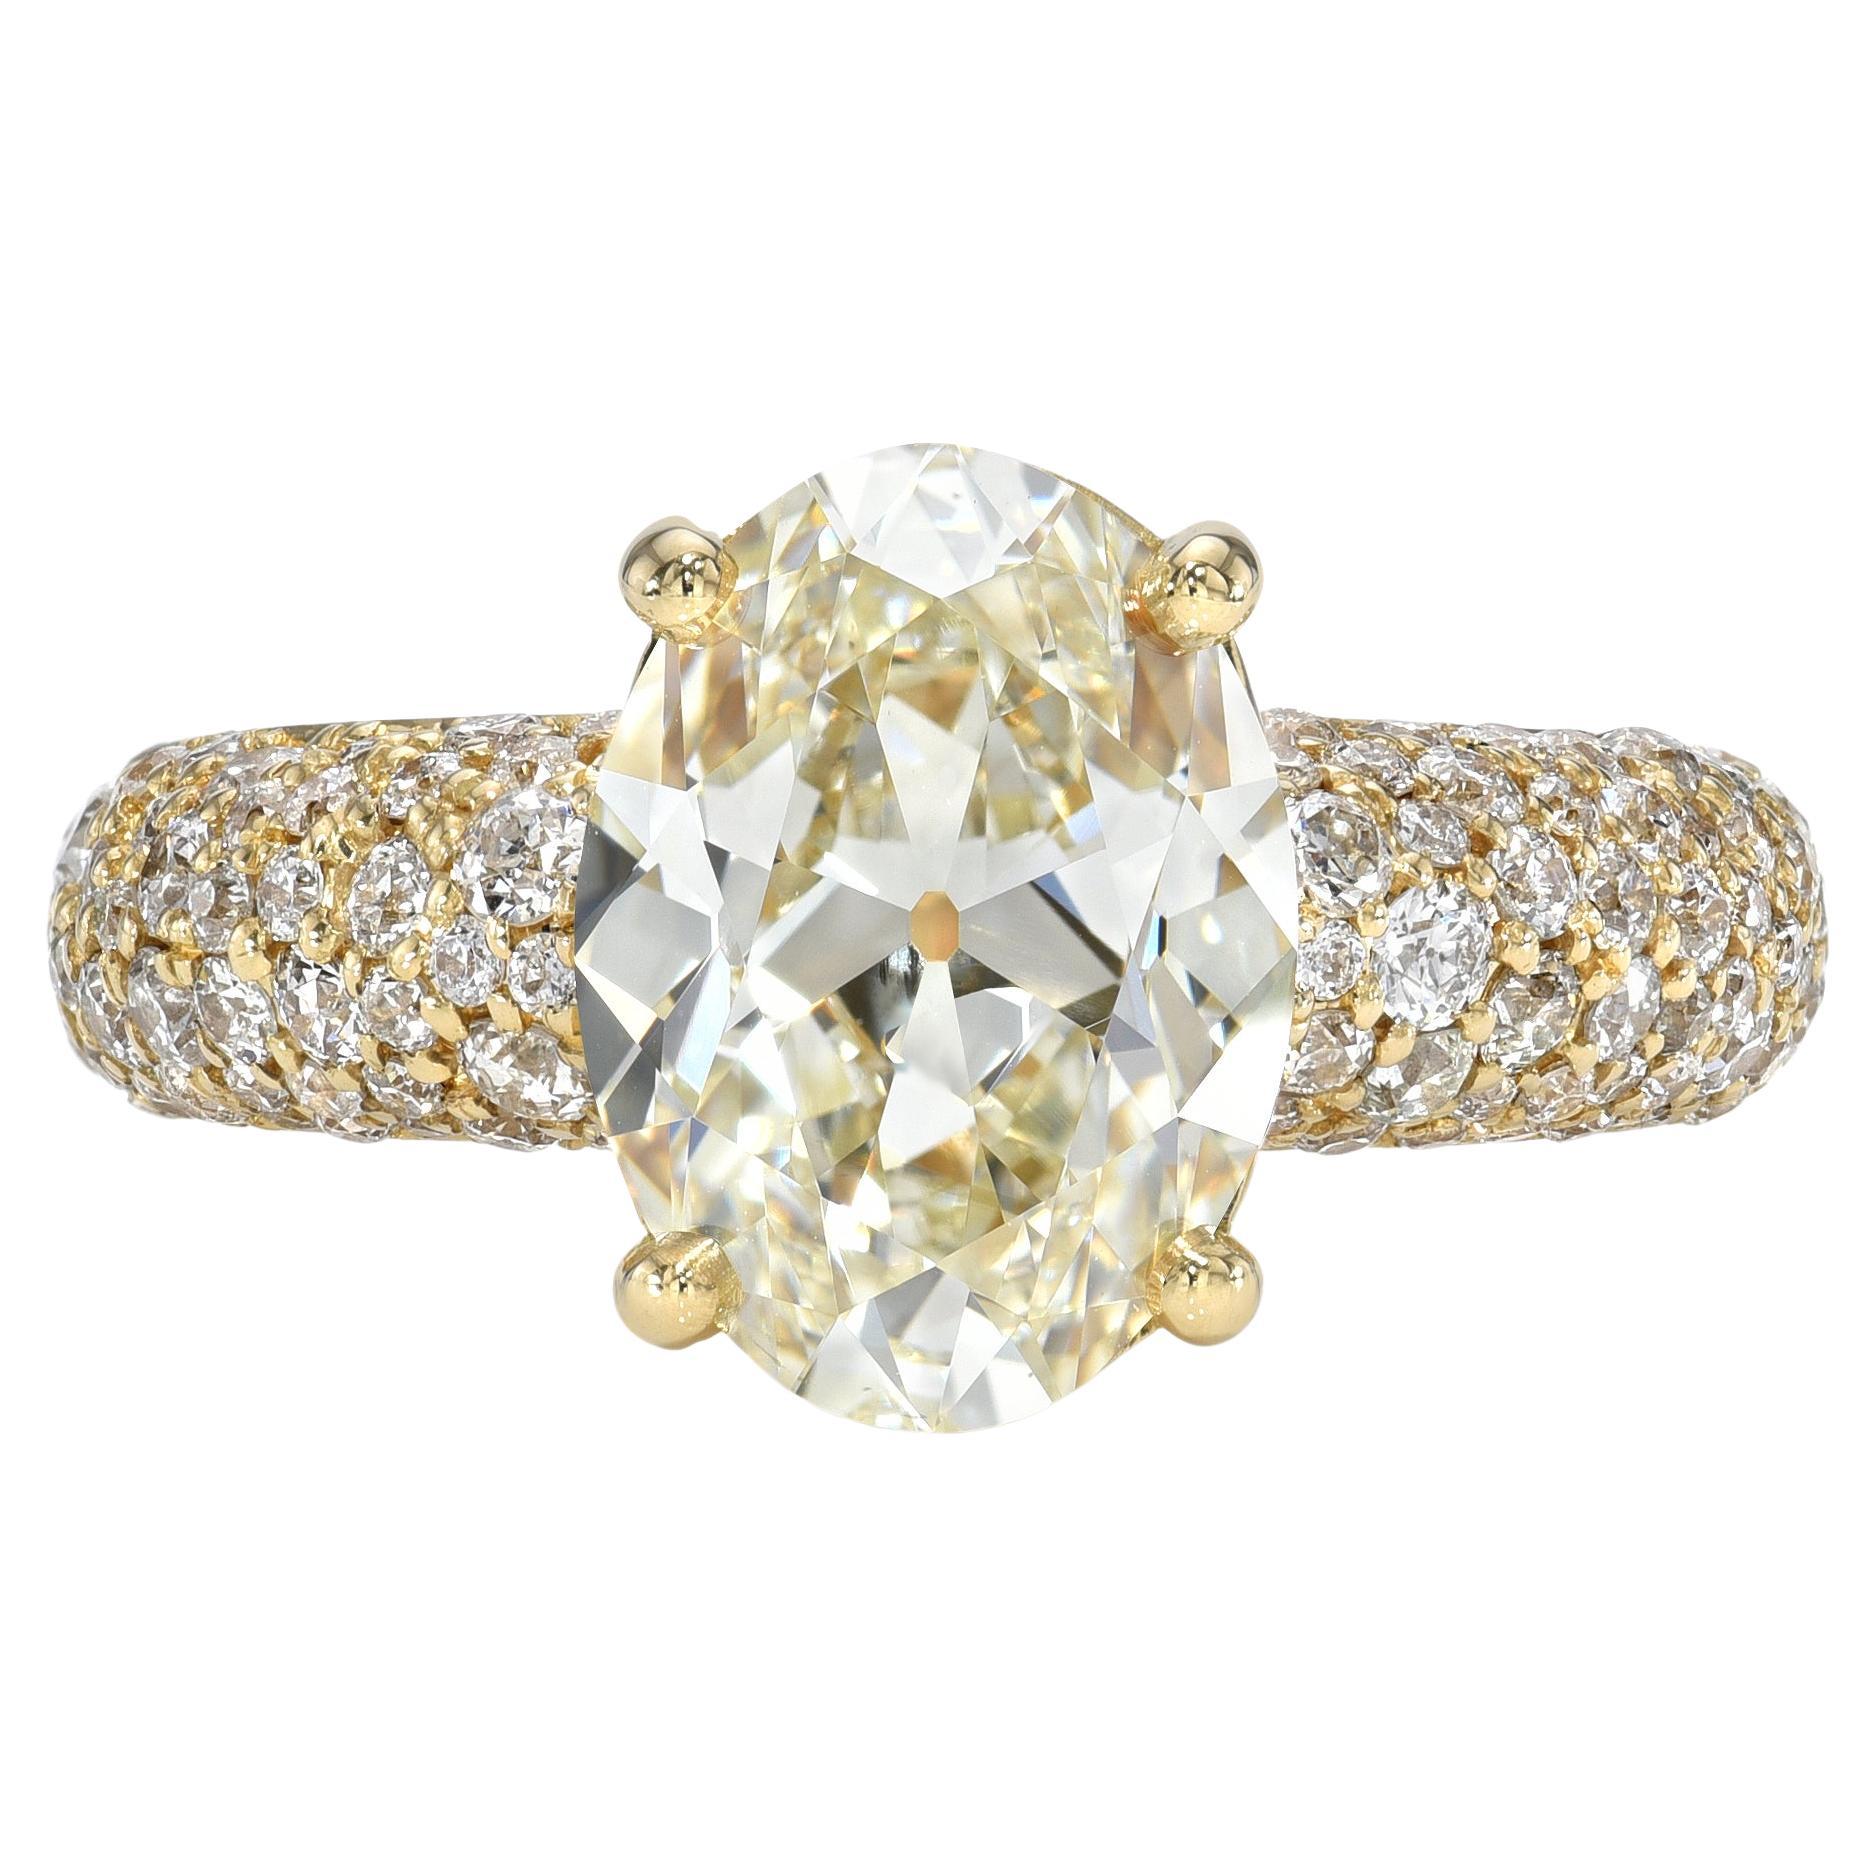 Handcrafted Gretchen Oval Cut Diamond Ring by Single Stone